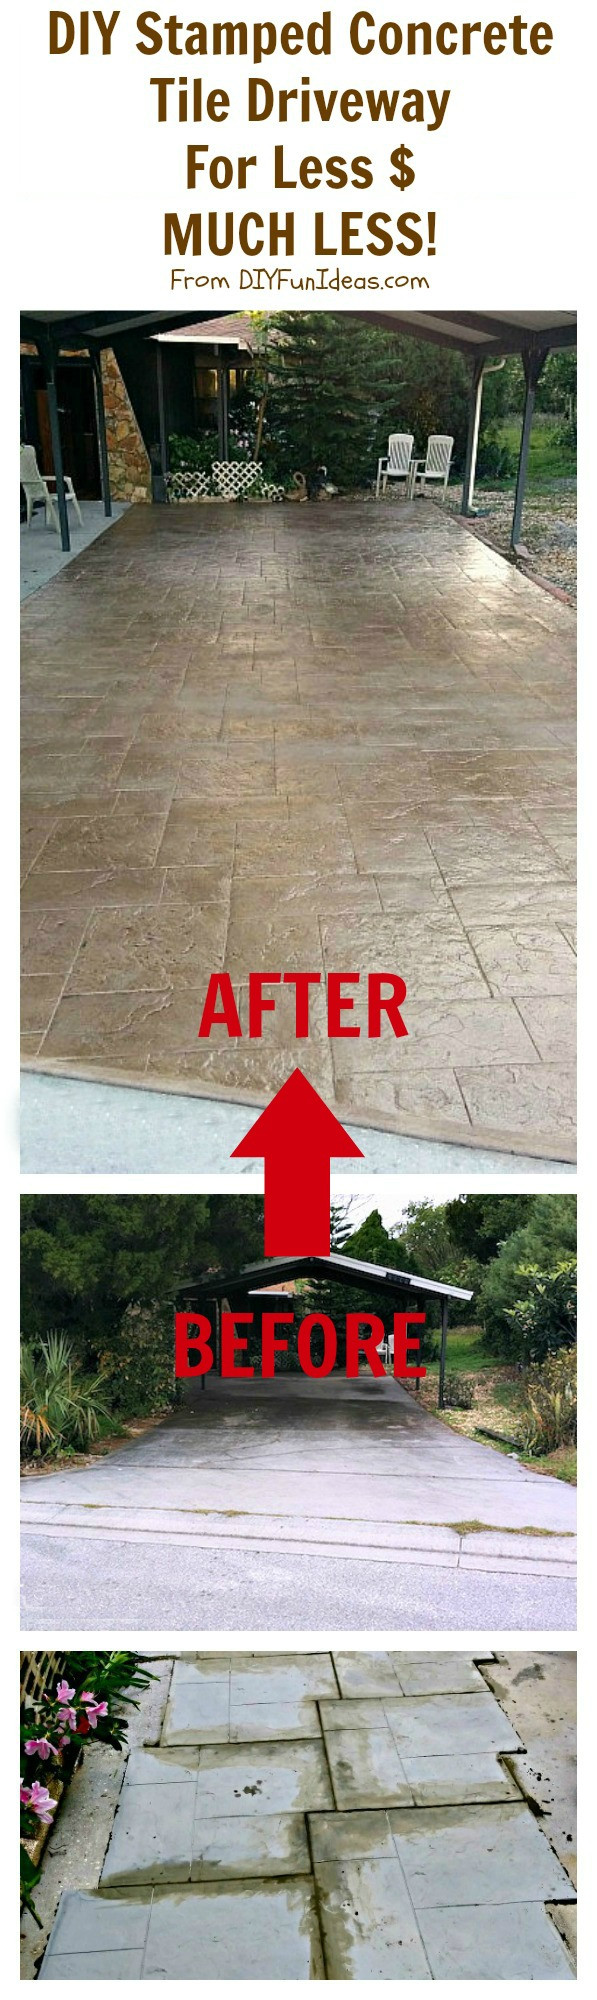 Best ideas about DIY Stamped Concrete
. Save or Pin GORGEOUS DIY STAMPED CONCRETE TILE DRIVEWAY FOR LESS Now.